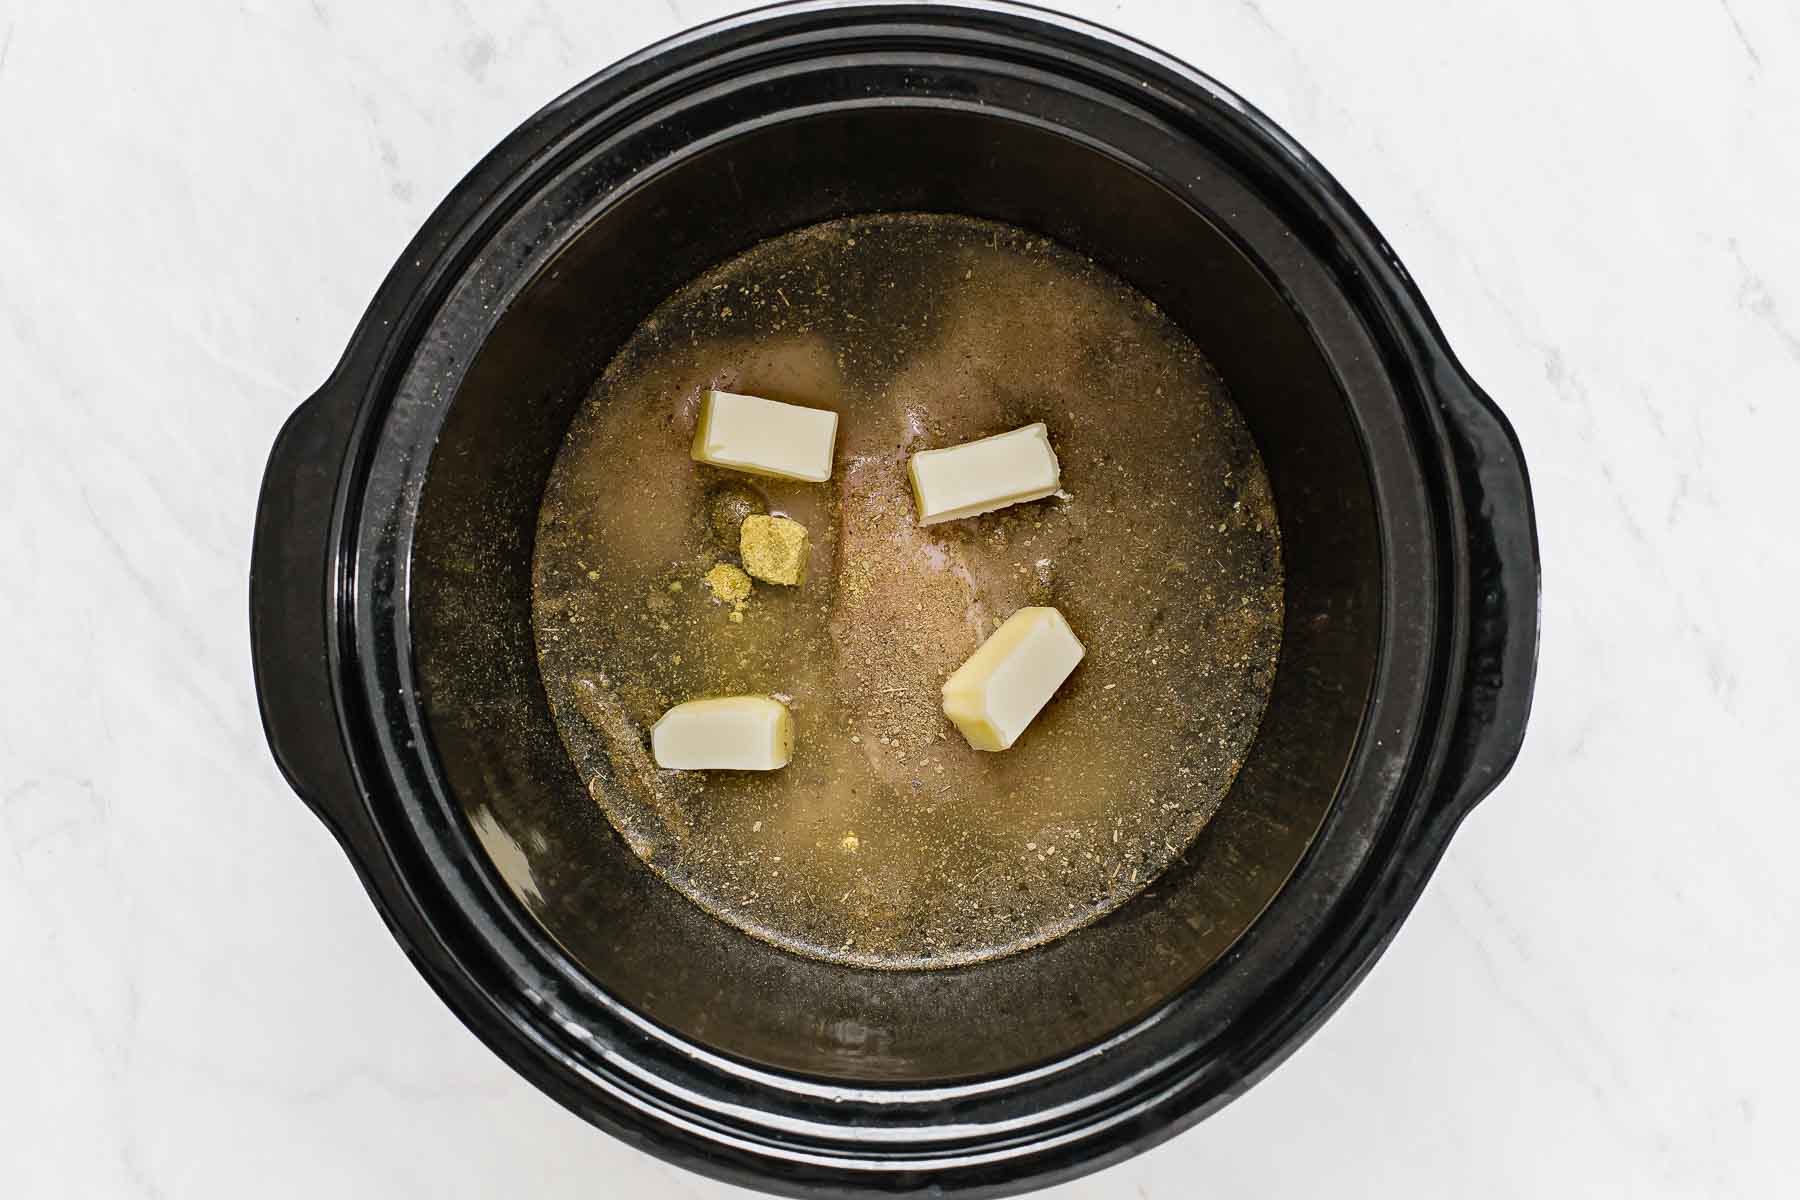 Chicken breasts with liquid and butter slices on top in crockpot.